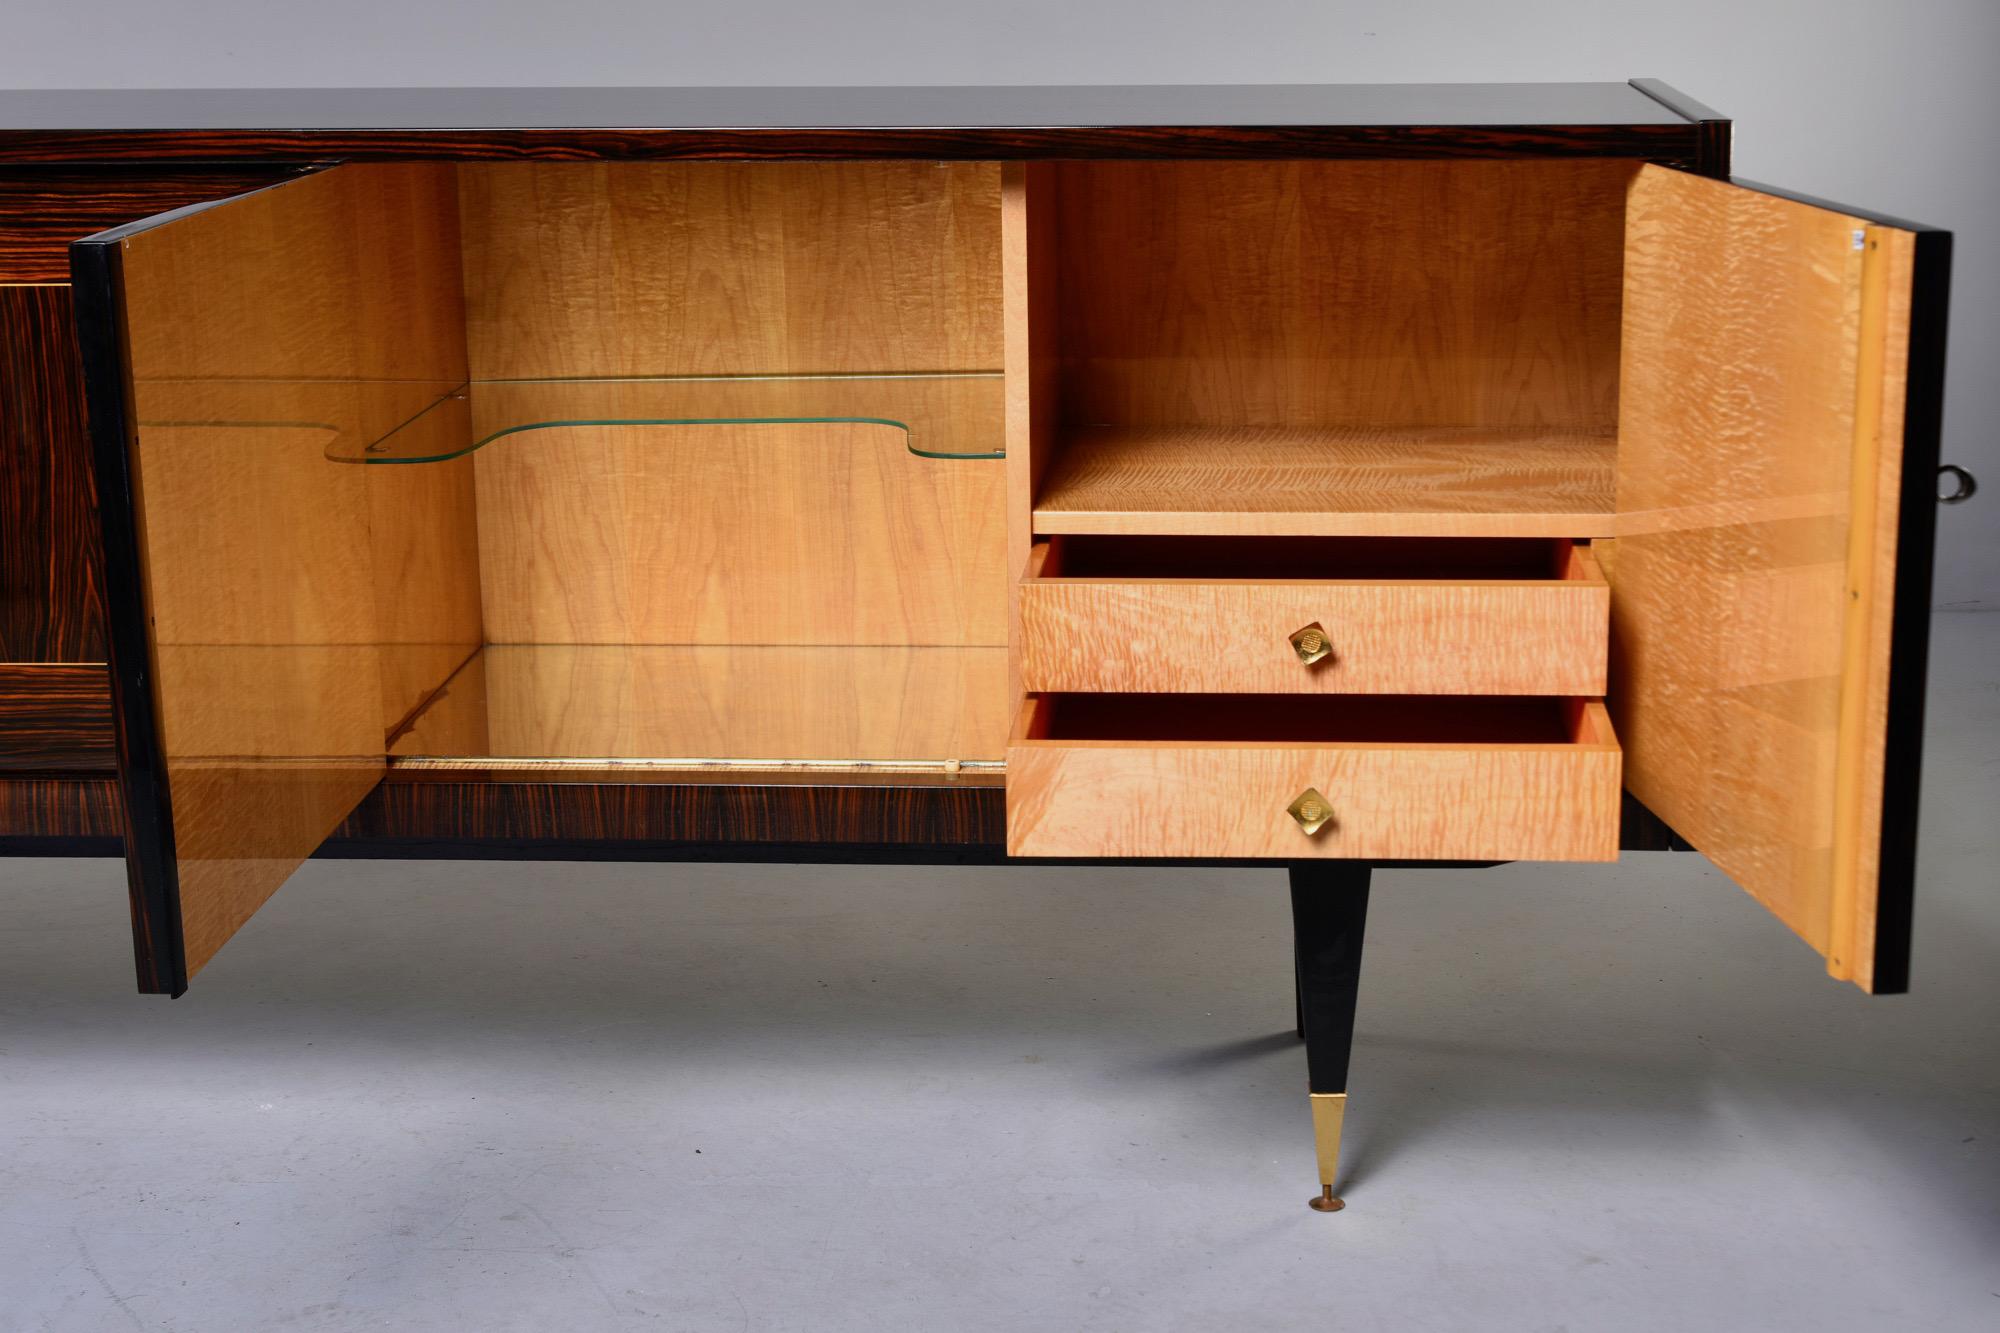 French Art Deco buffet or credenza in Macassar, circa 1940s. Cabinet front features elaborate geometric marquetry. Locking cabinets on each end with drawers top on one side with open storage above. The middle compartment features a glass shelf next